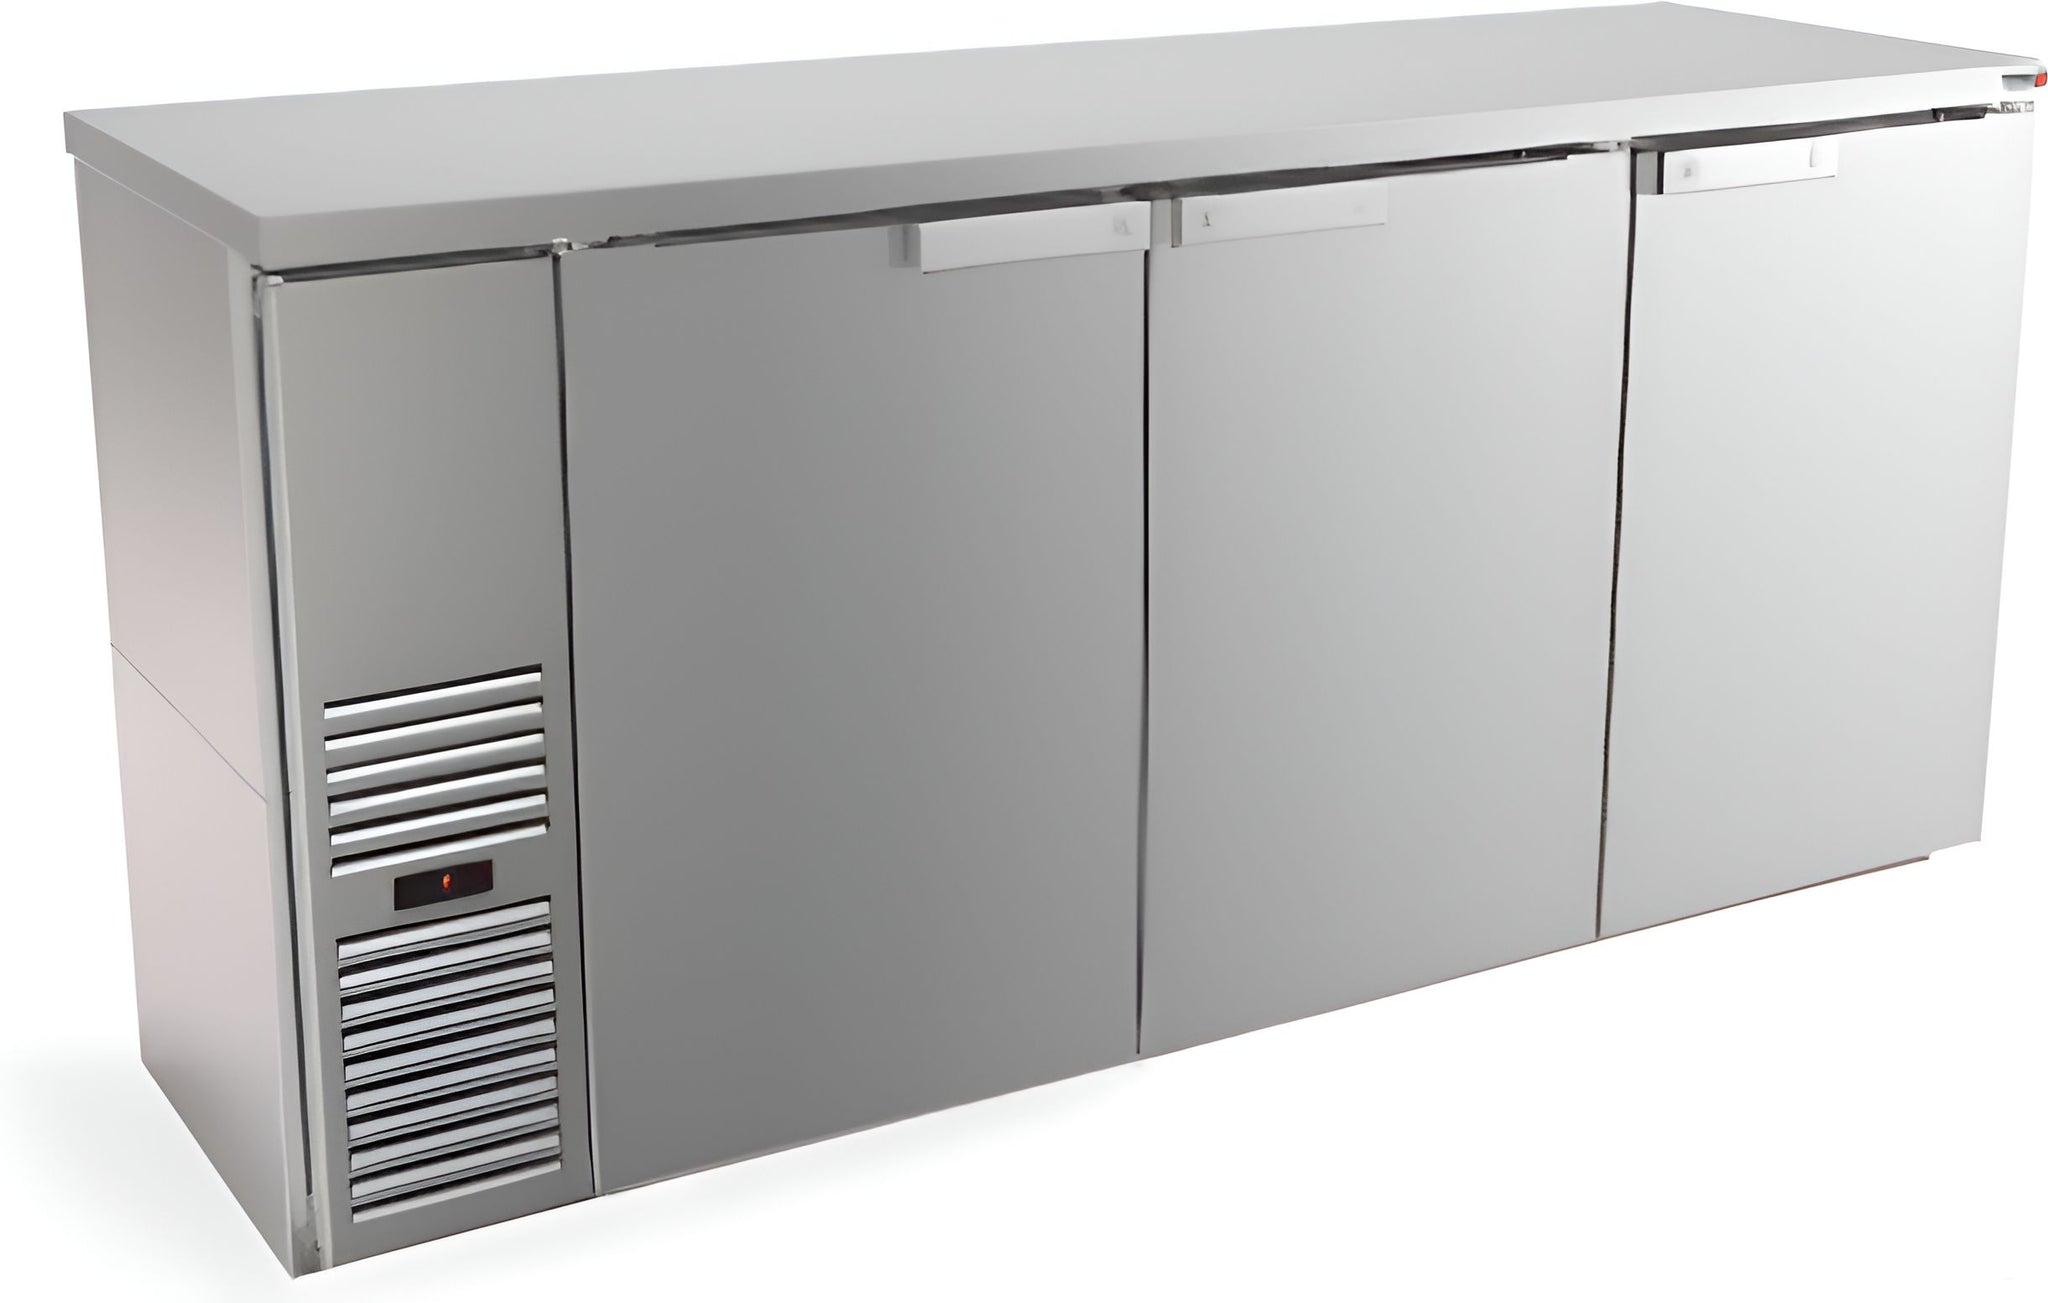 Fagor - FBB Series 115 V, 95.5" Stainless Steel Three Solid Door Back Bar Refrigerator - FBB-95S-N